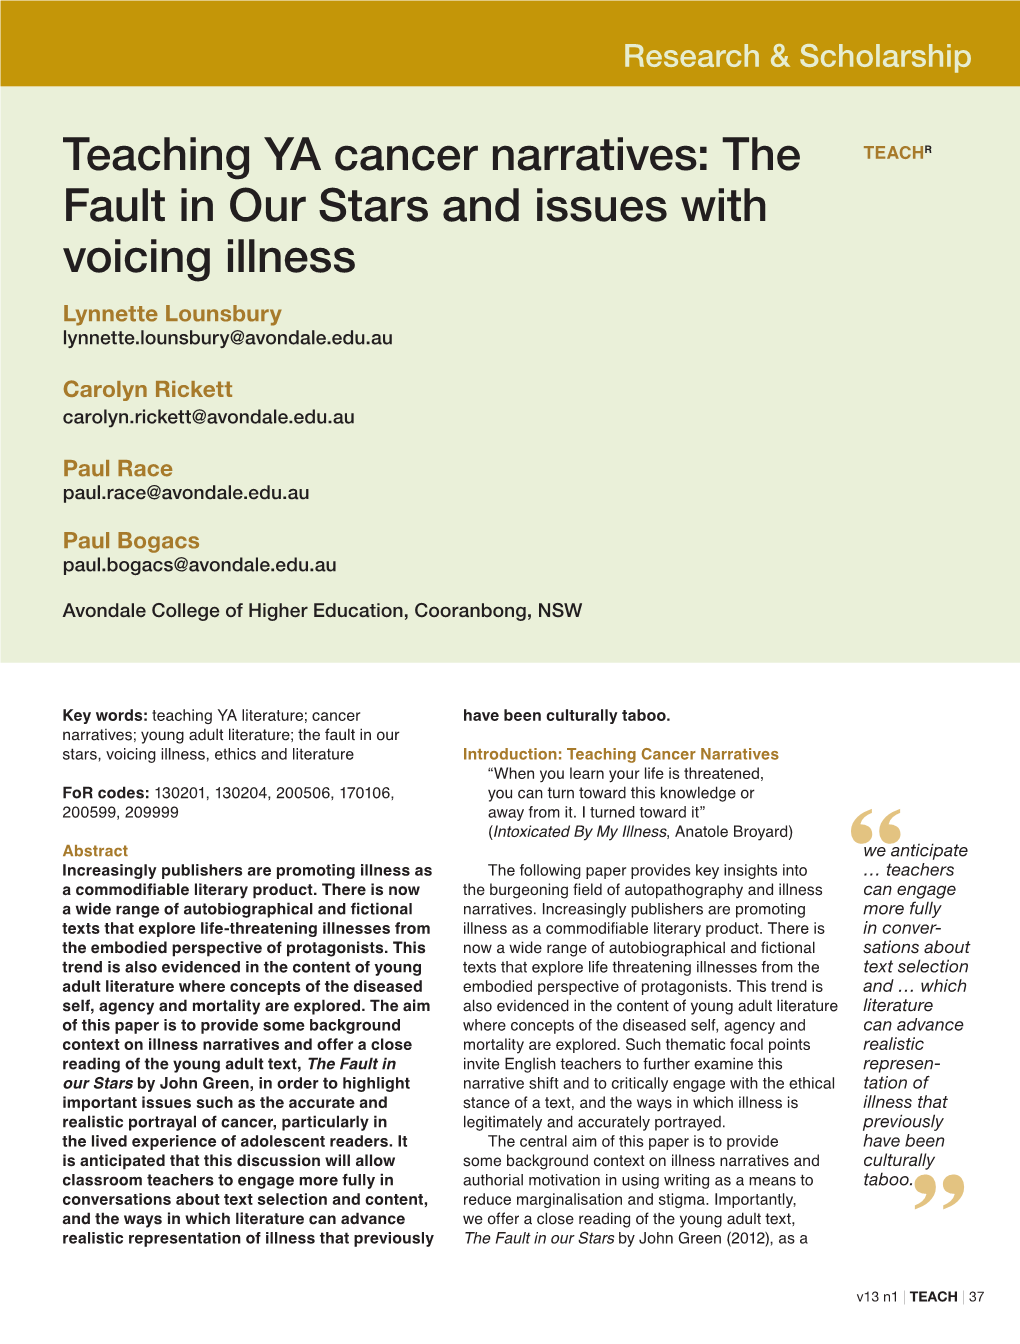 Teaching YA Cancer Narratives: the Fault in Our Stars and Issues With